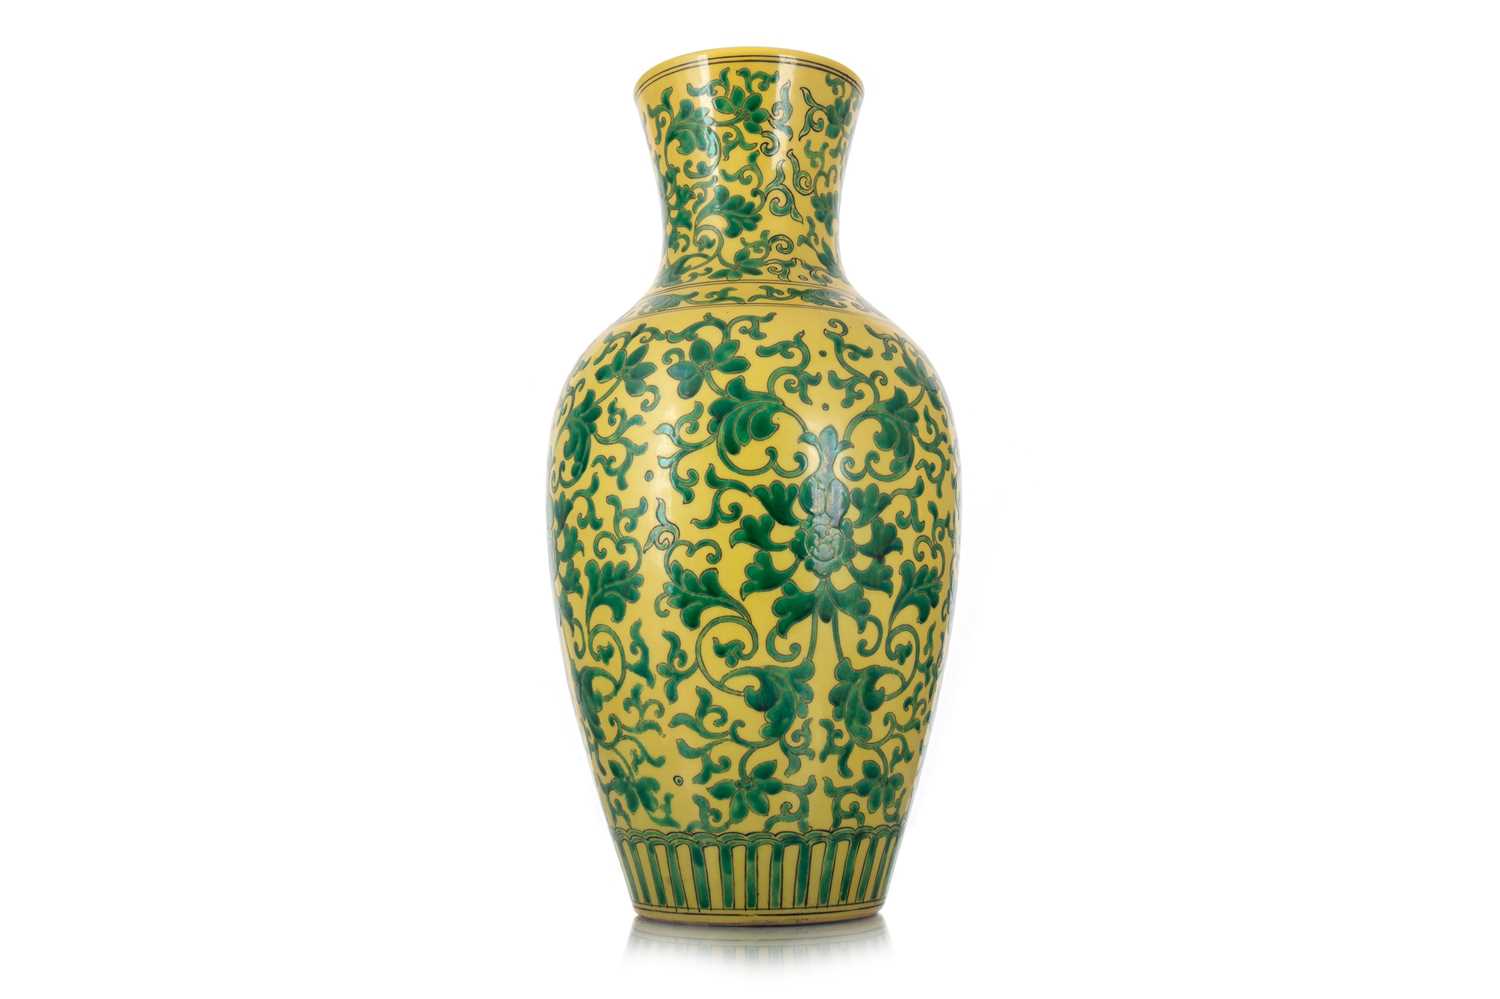 CHINESE FAMILLE JAUNE BALUSTER VASE, LATE 19TH/EARLY 20TH CENTURY